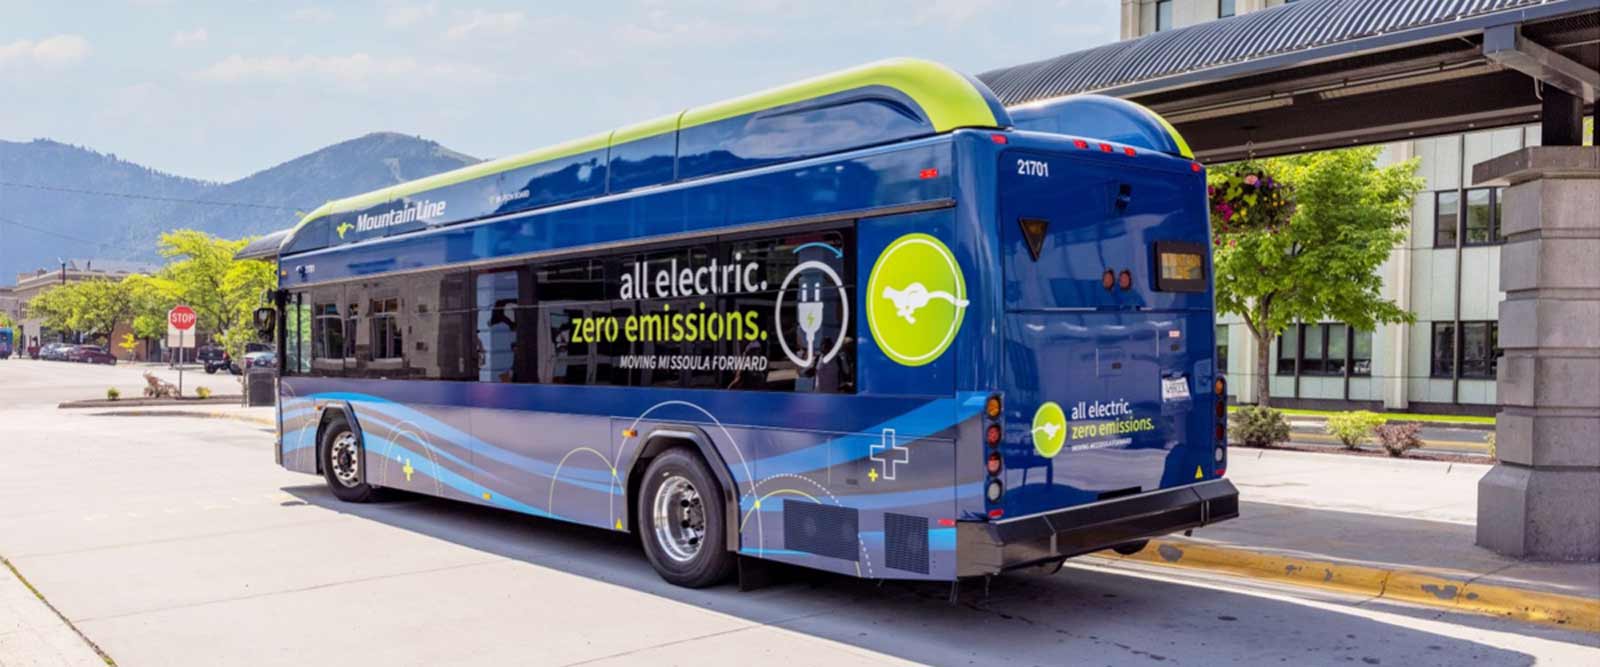 Mountain Line Awarded $10 M Federal Grant to Purchase New Electric Buses